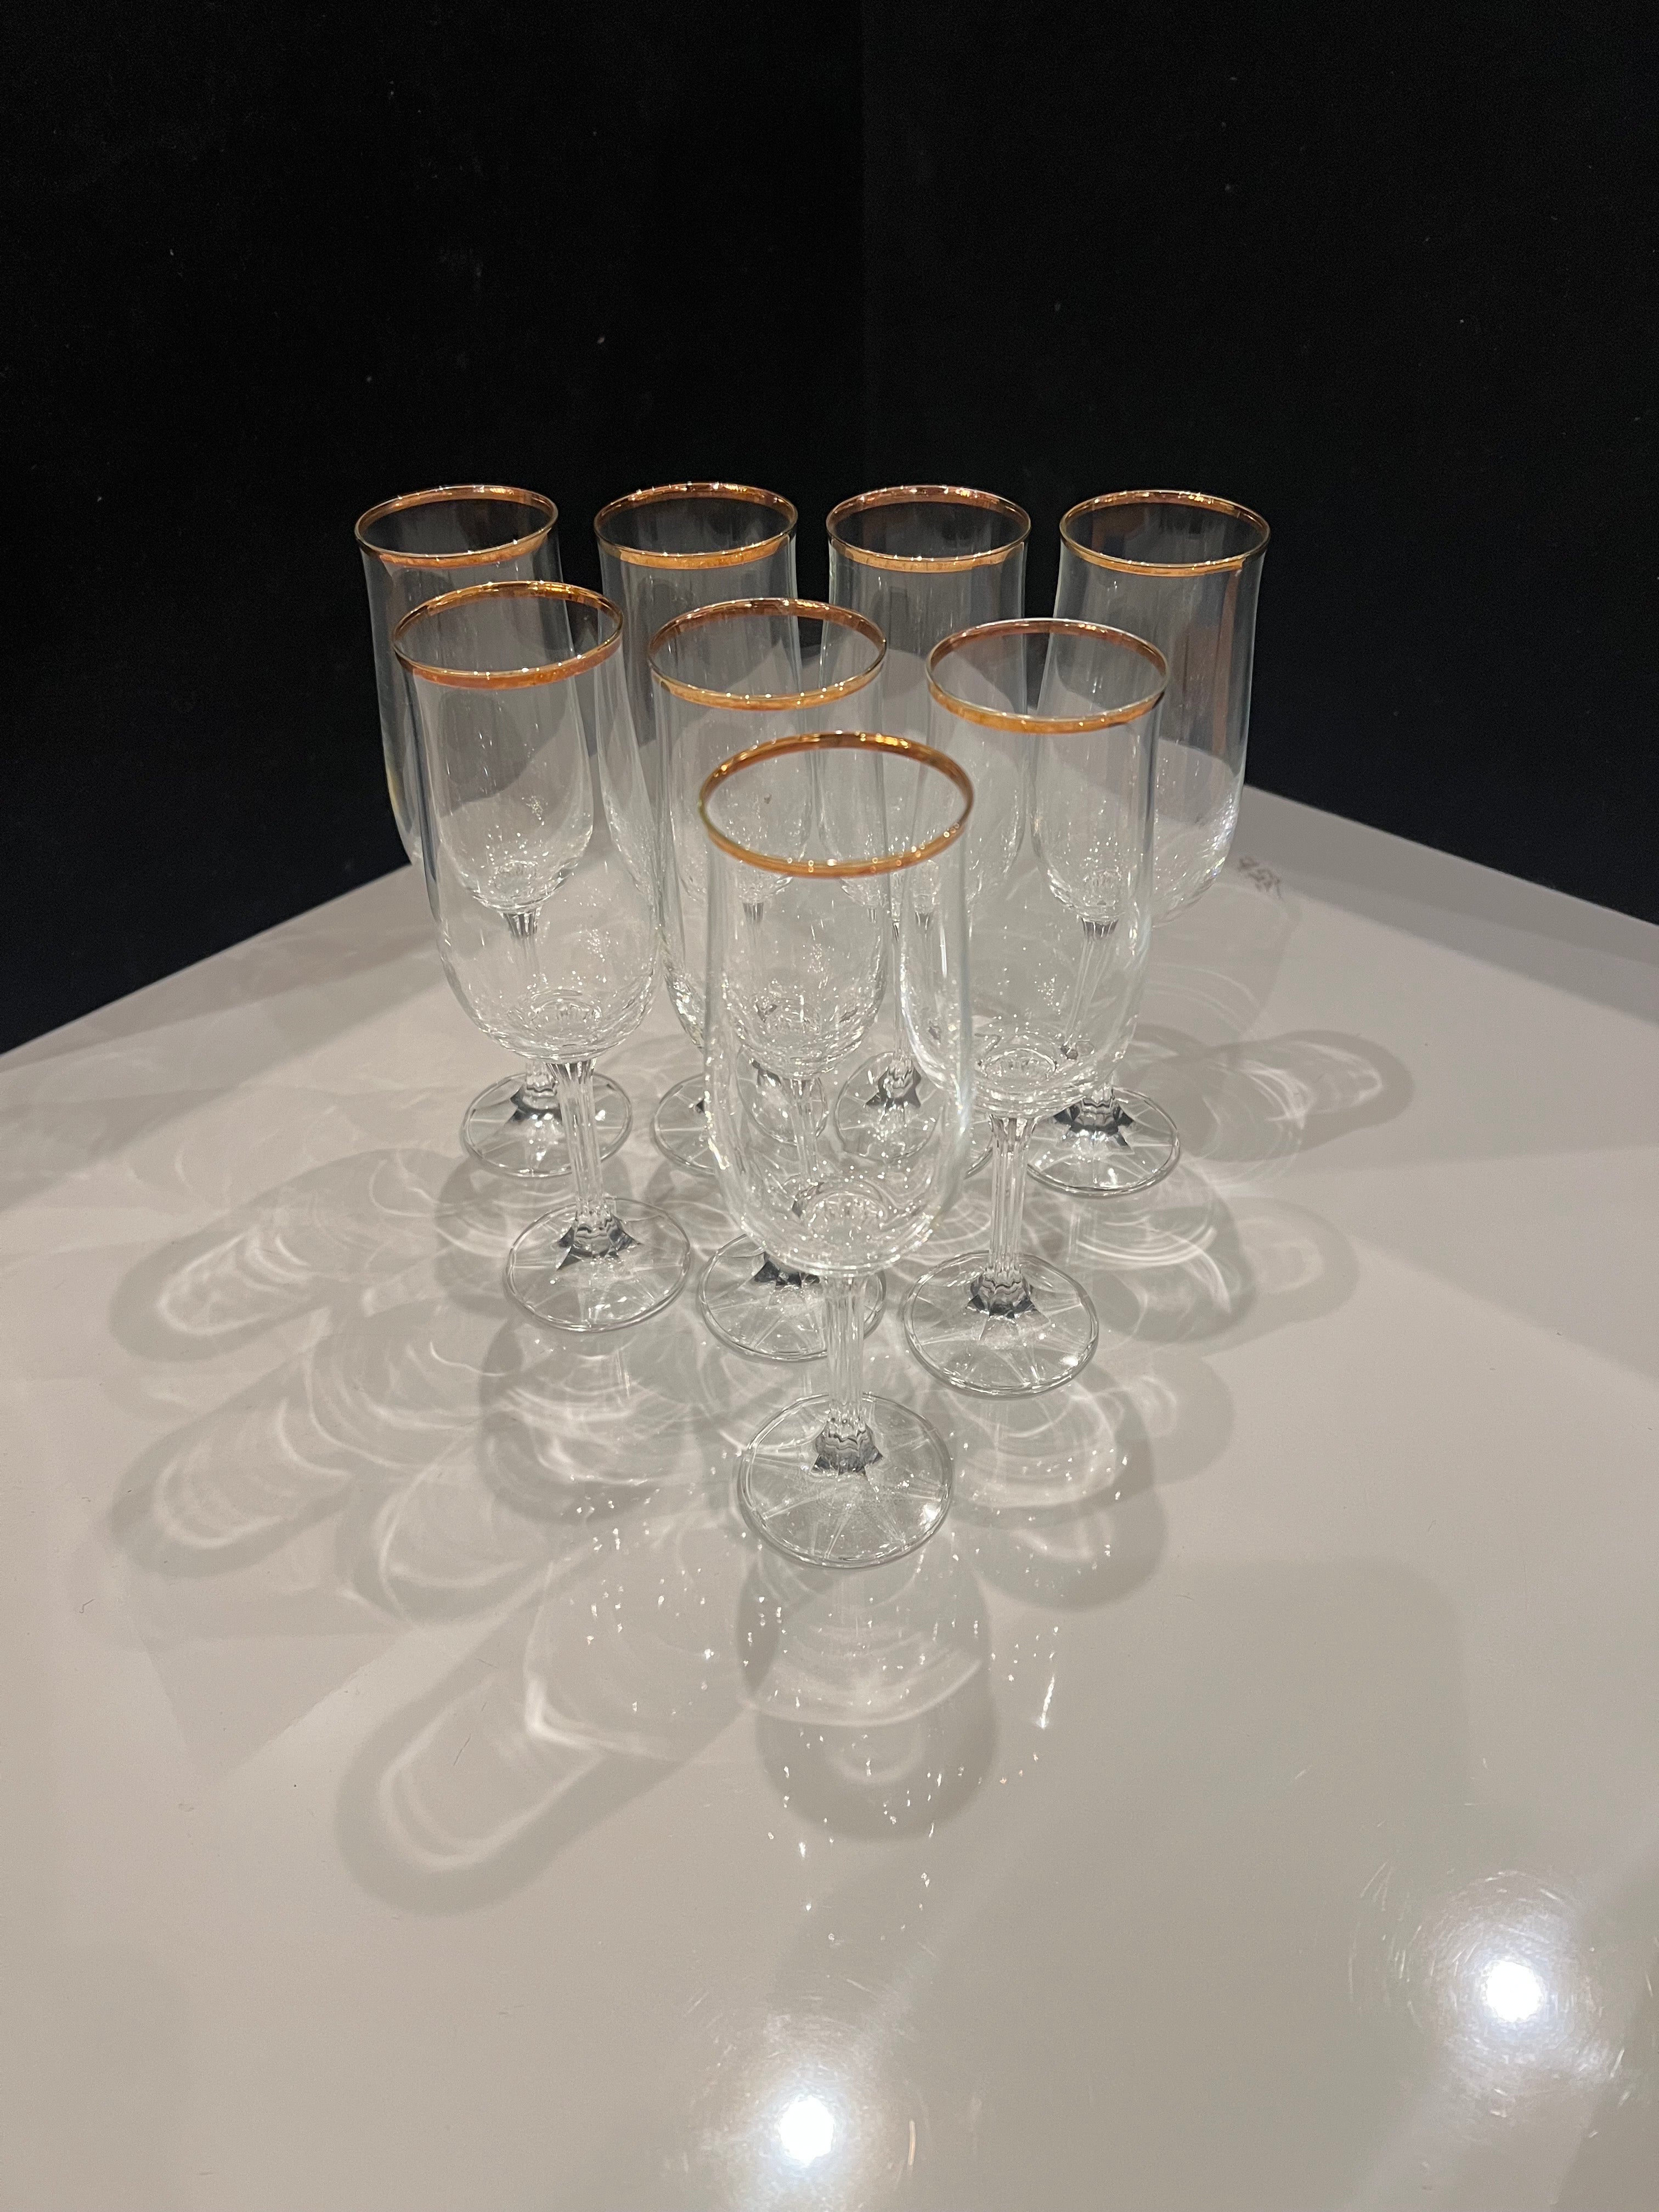 Beautiful elegant gorgeous fluted champagne glasses excellent condition with gold rim set of 8 .